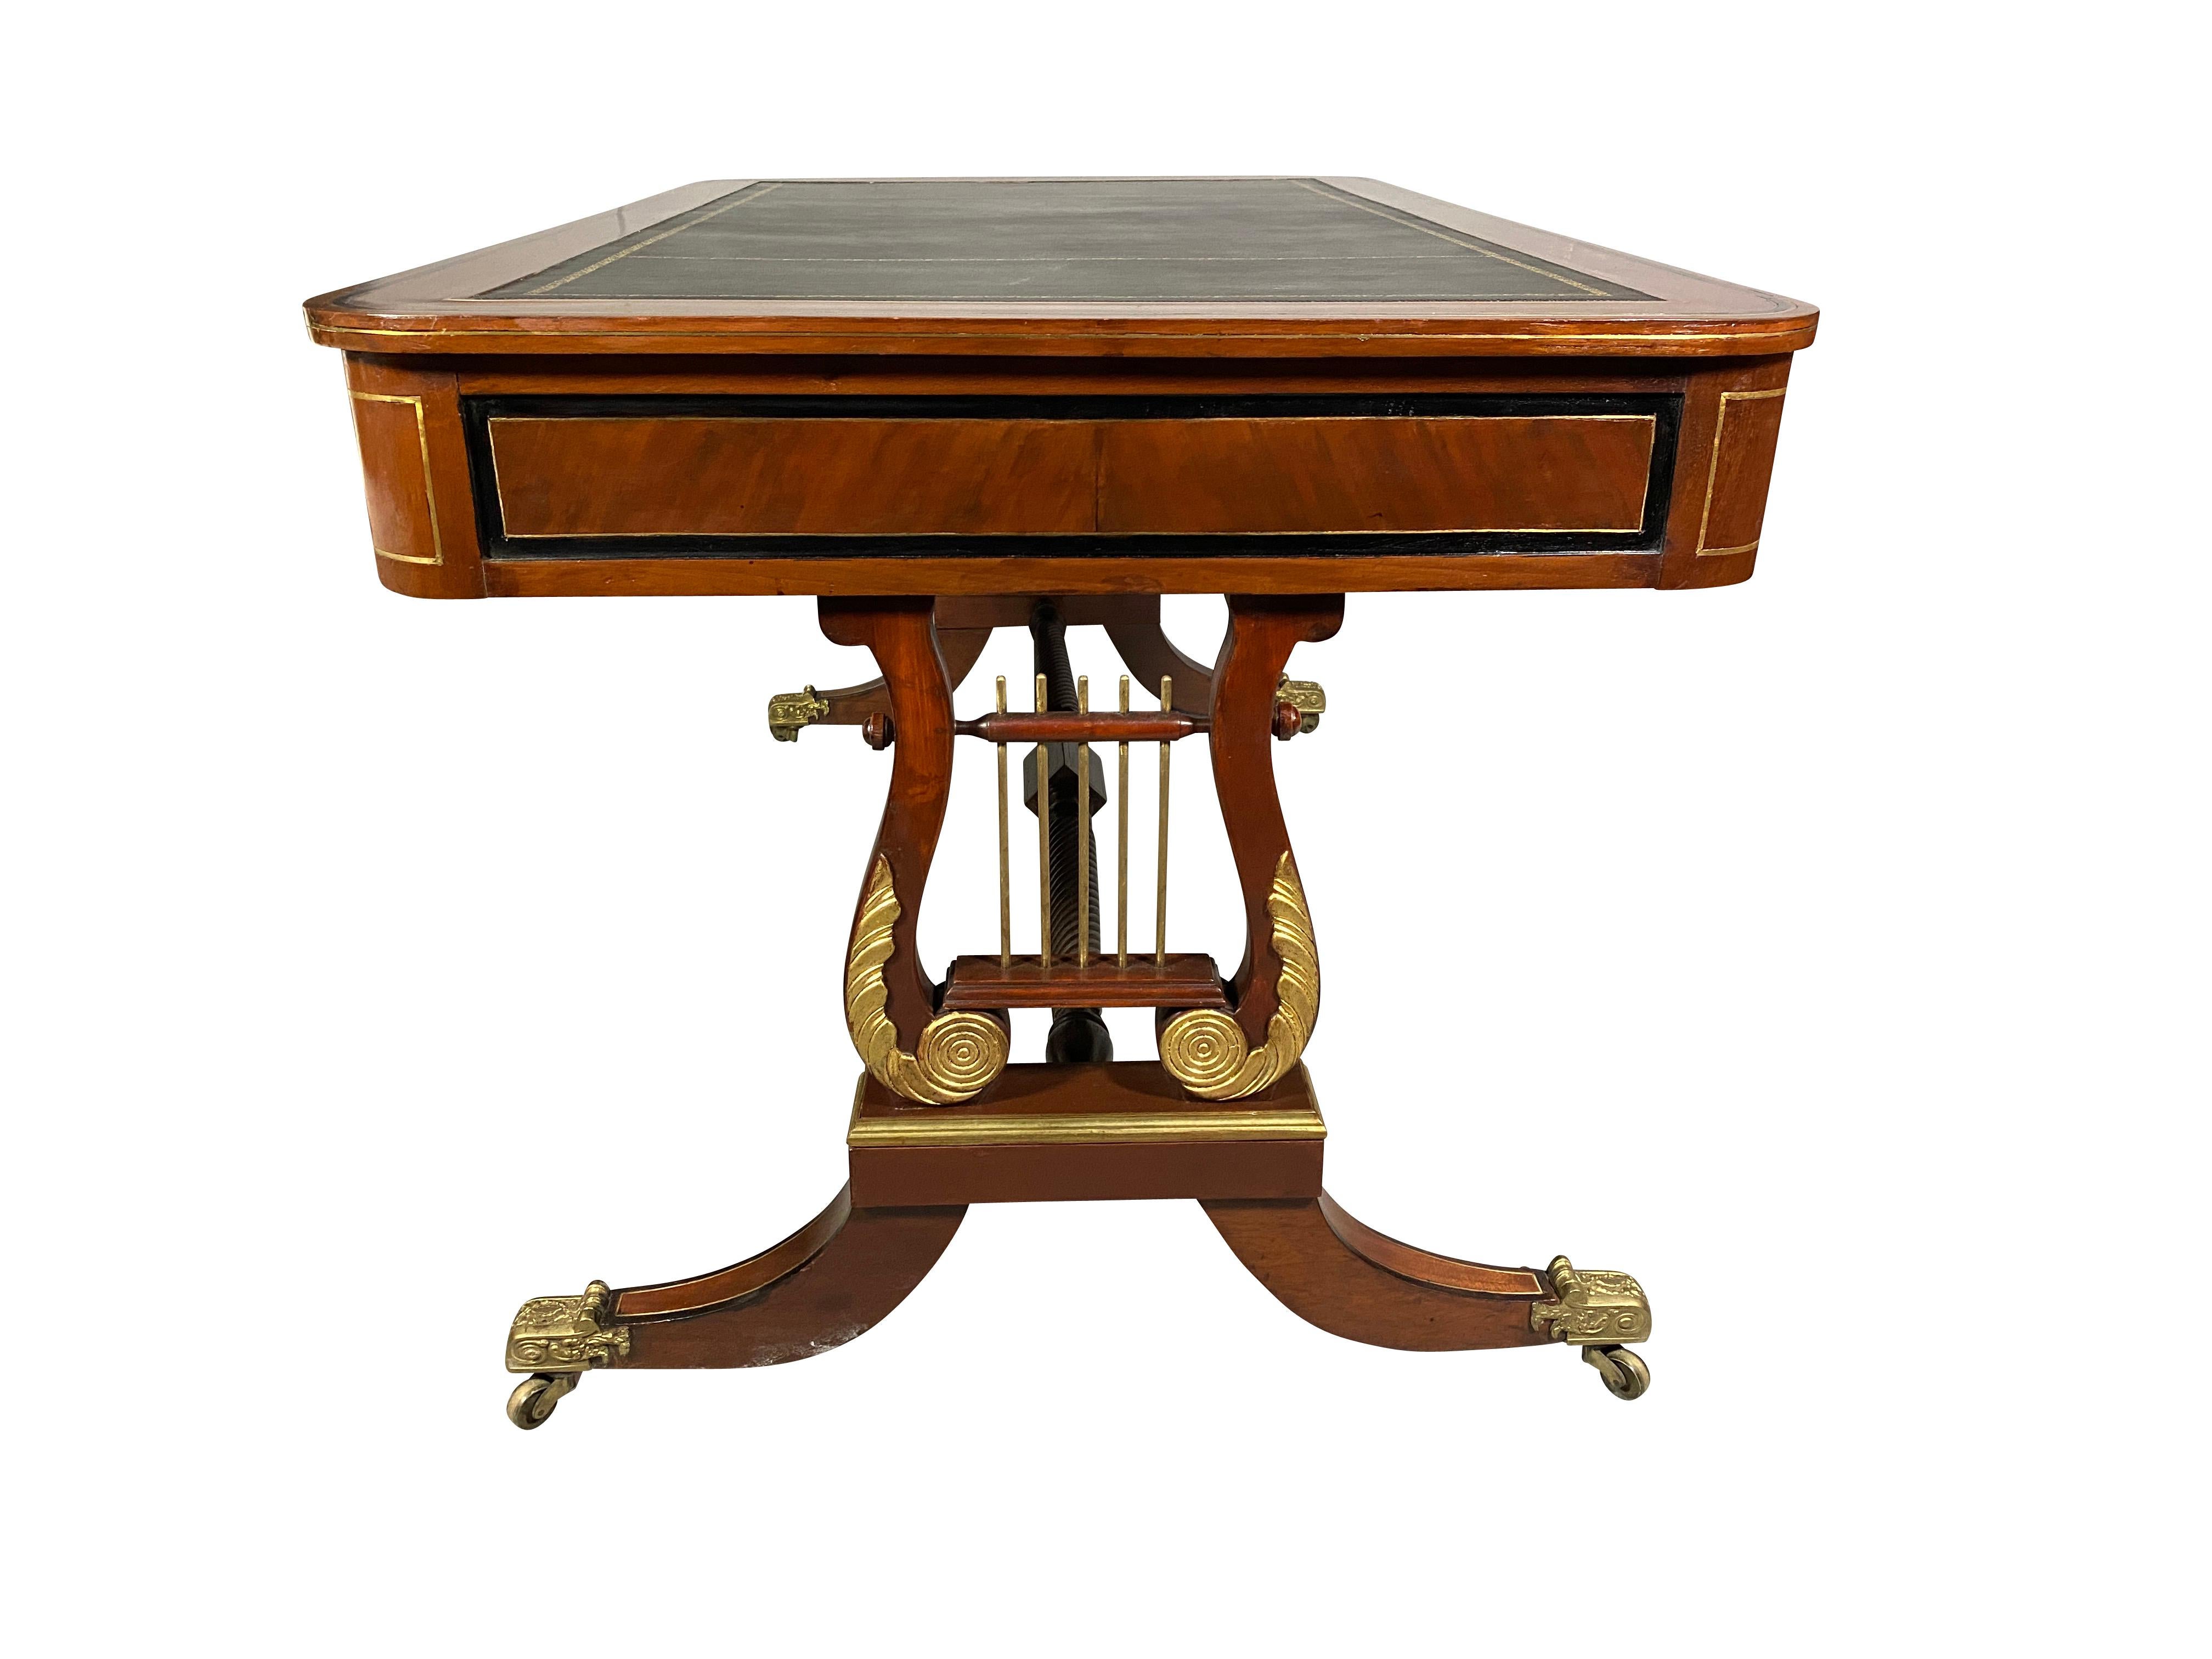 19th Century Regency Style Mahogany and Brass Inlaid Writing Table